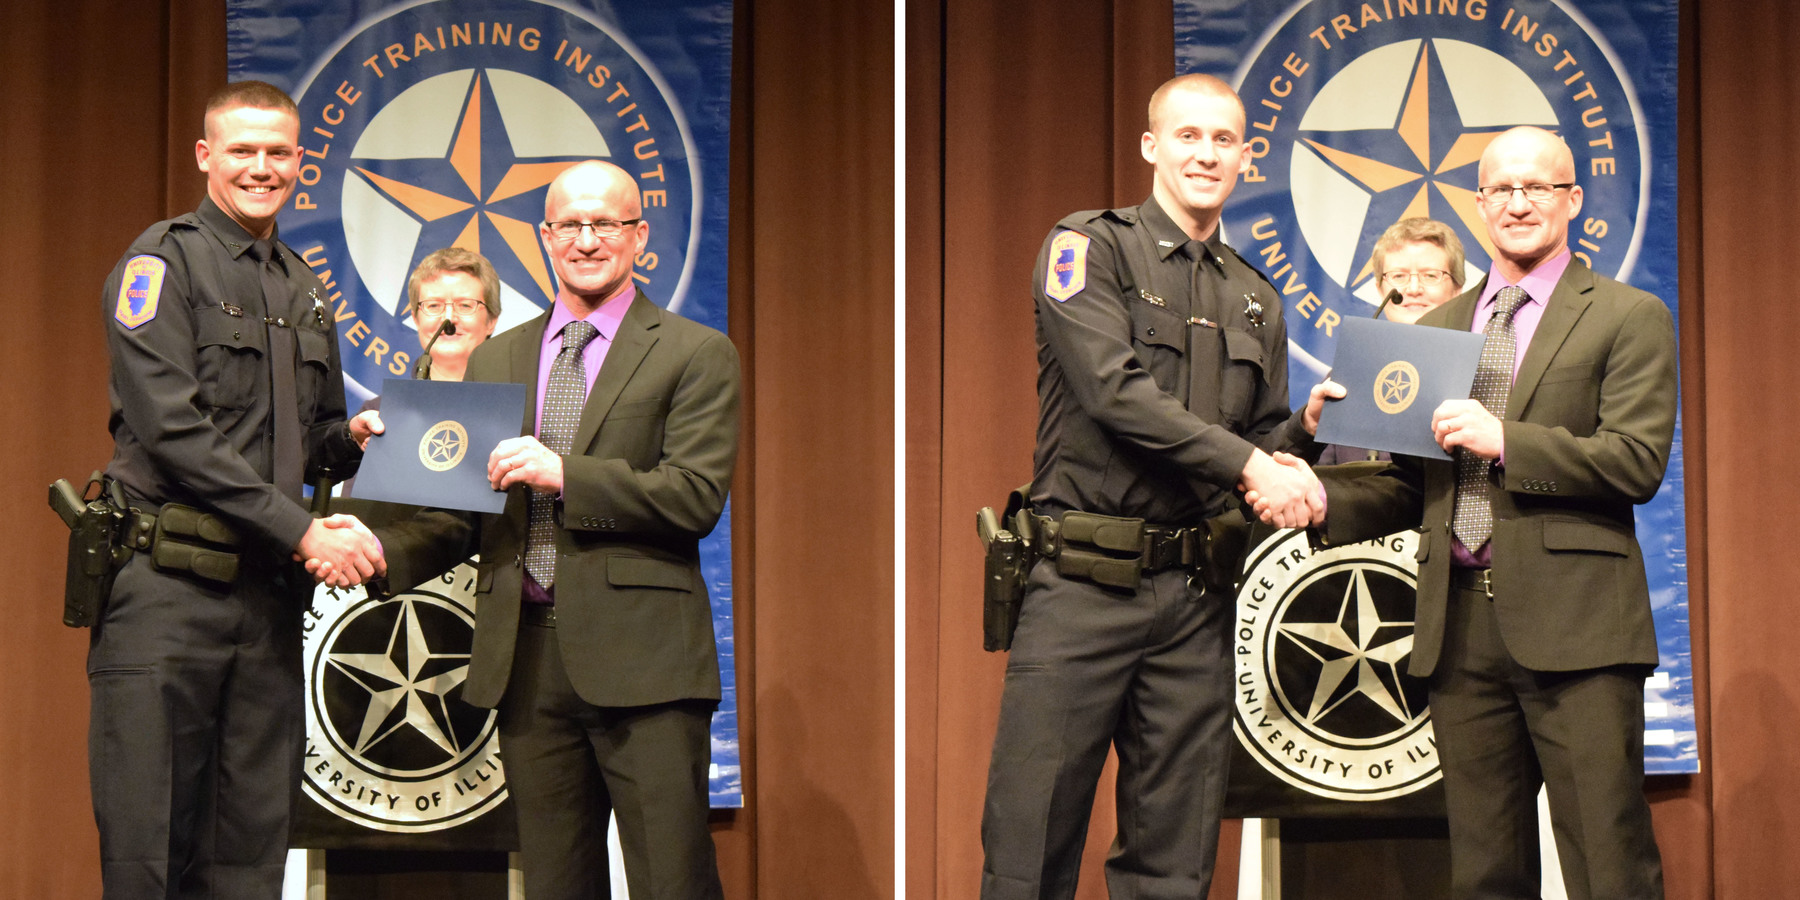 Officers Jacob Gibson and Daniel Leake graduating from the University of Illinois Police Training Institute.